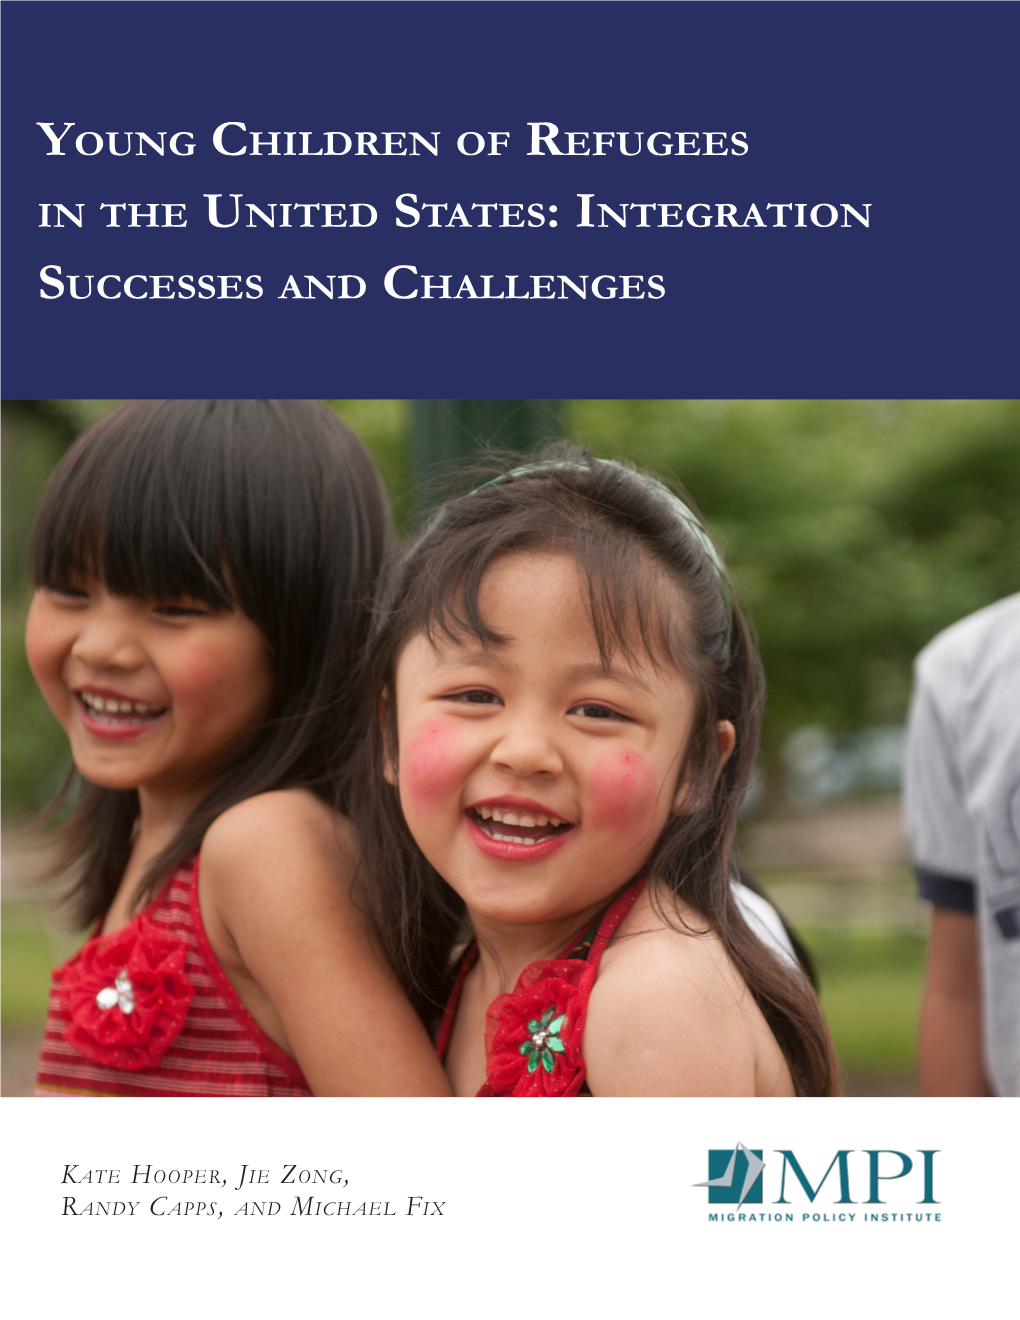 Young Children of Refugees in the United States: Integration Successes and Challenges